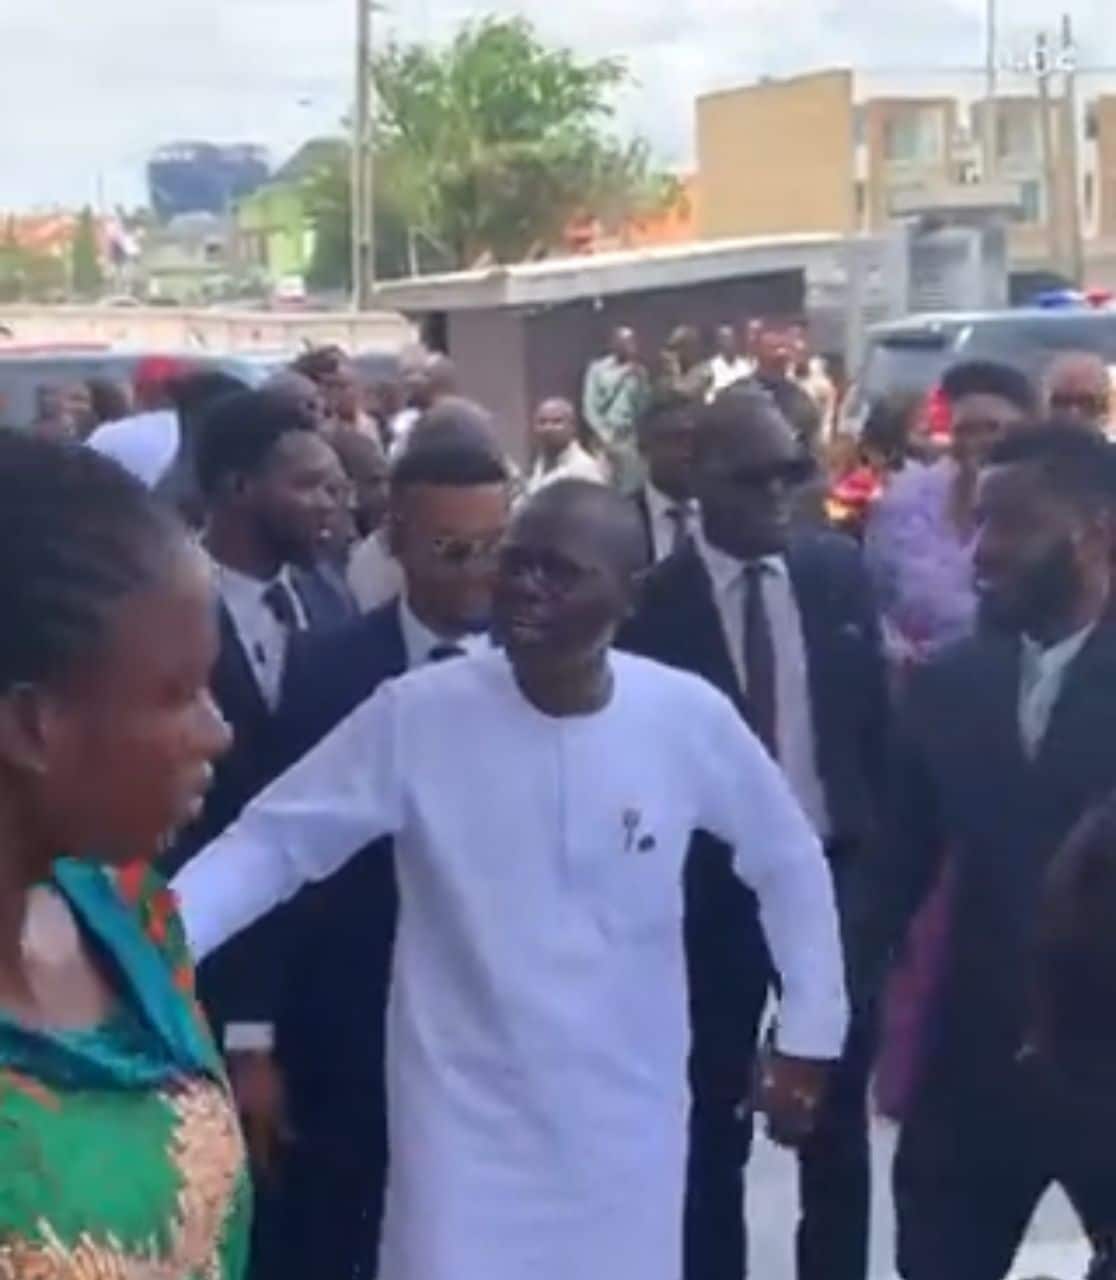 "Governor don turn church greeter" — Sanwo-Olu trails reactions following meet-and-greet at church